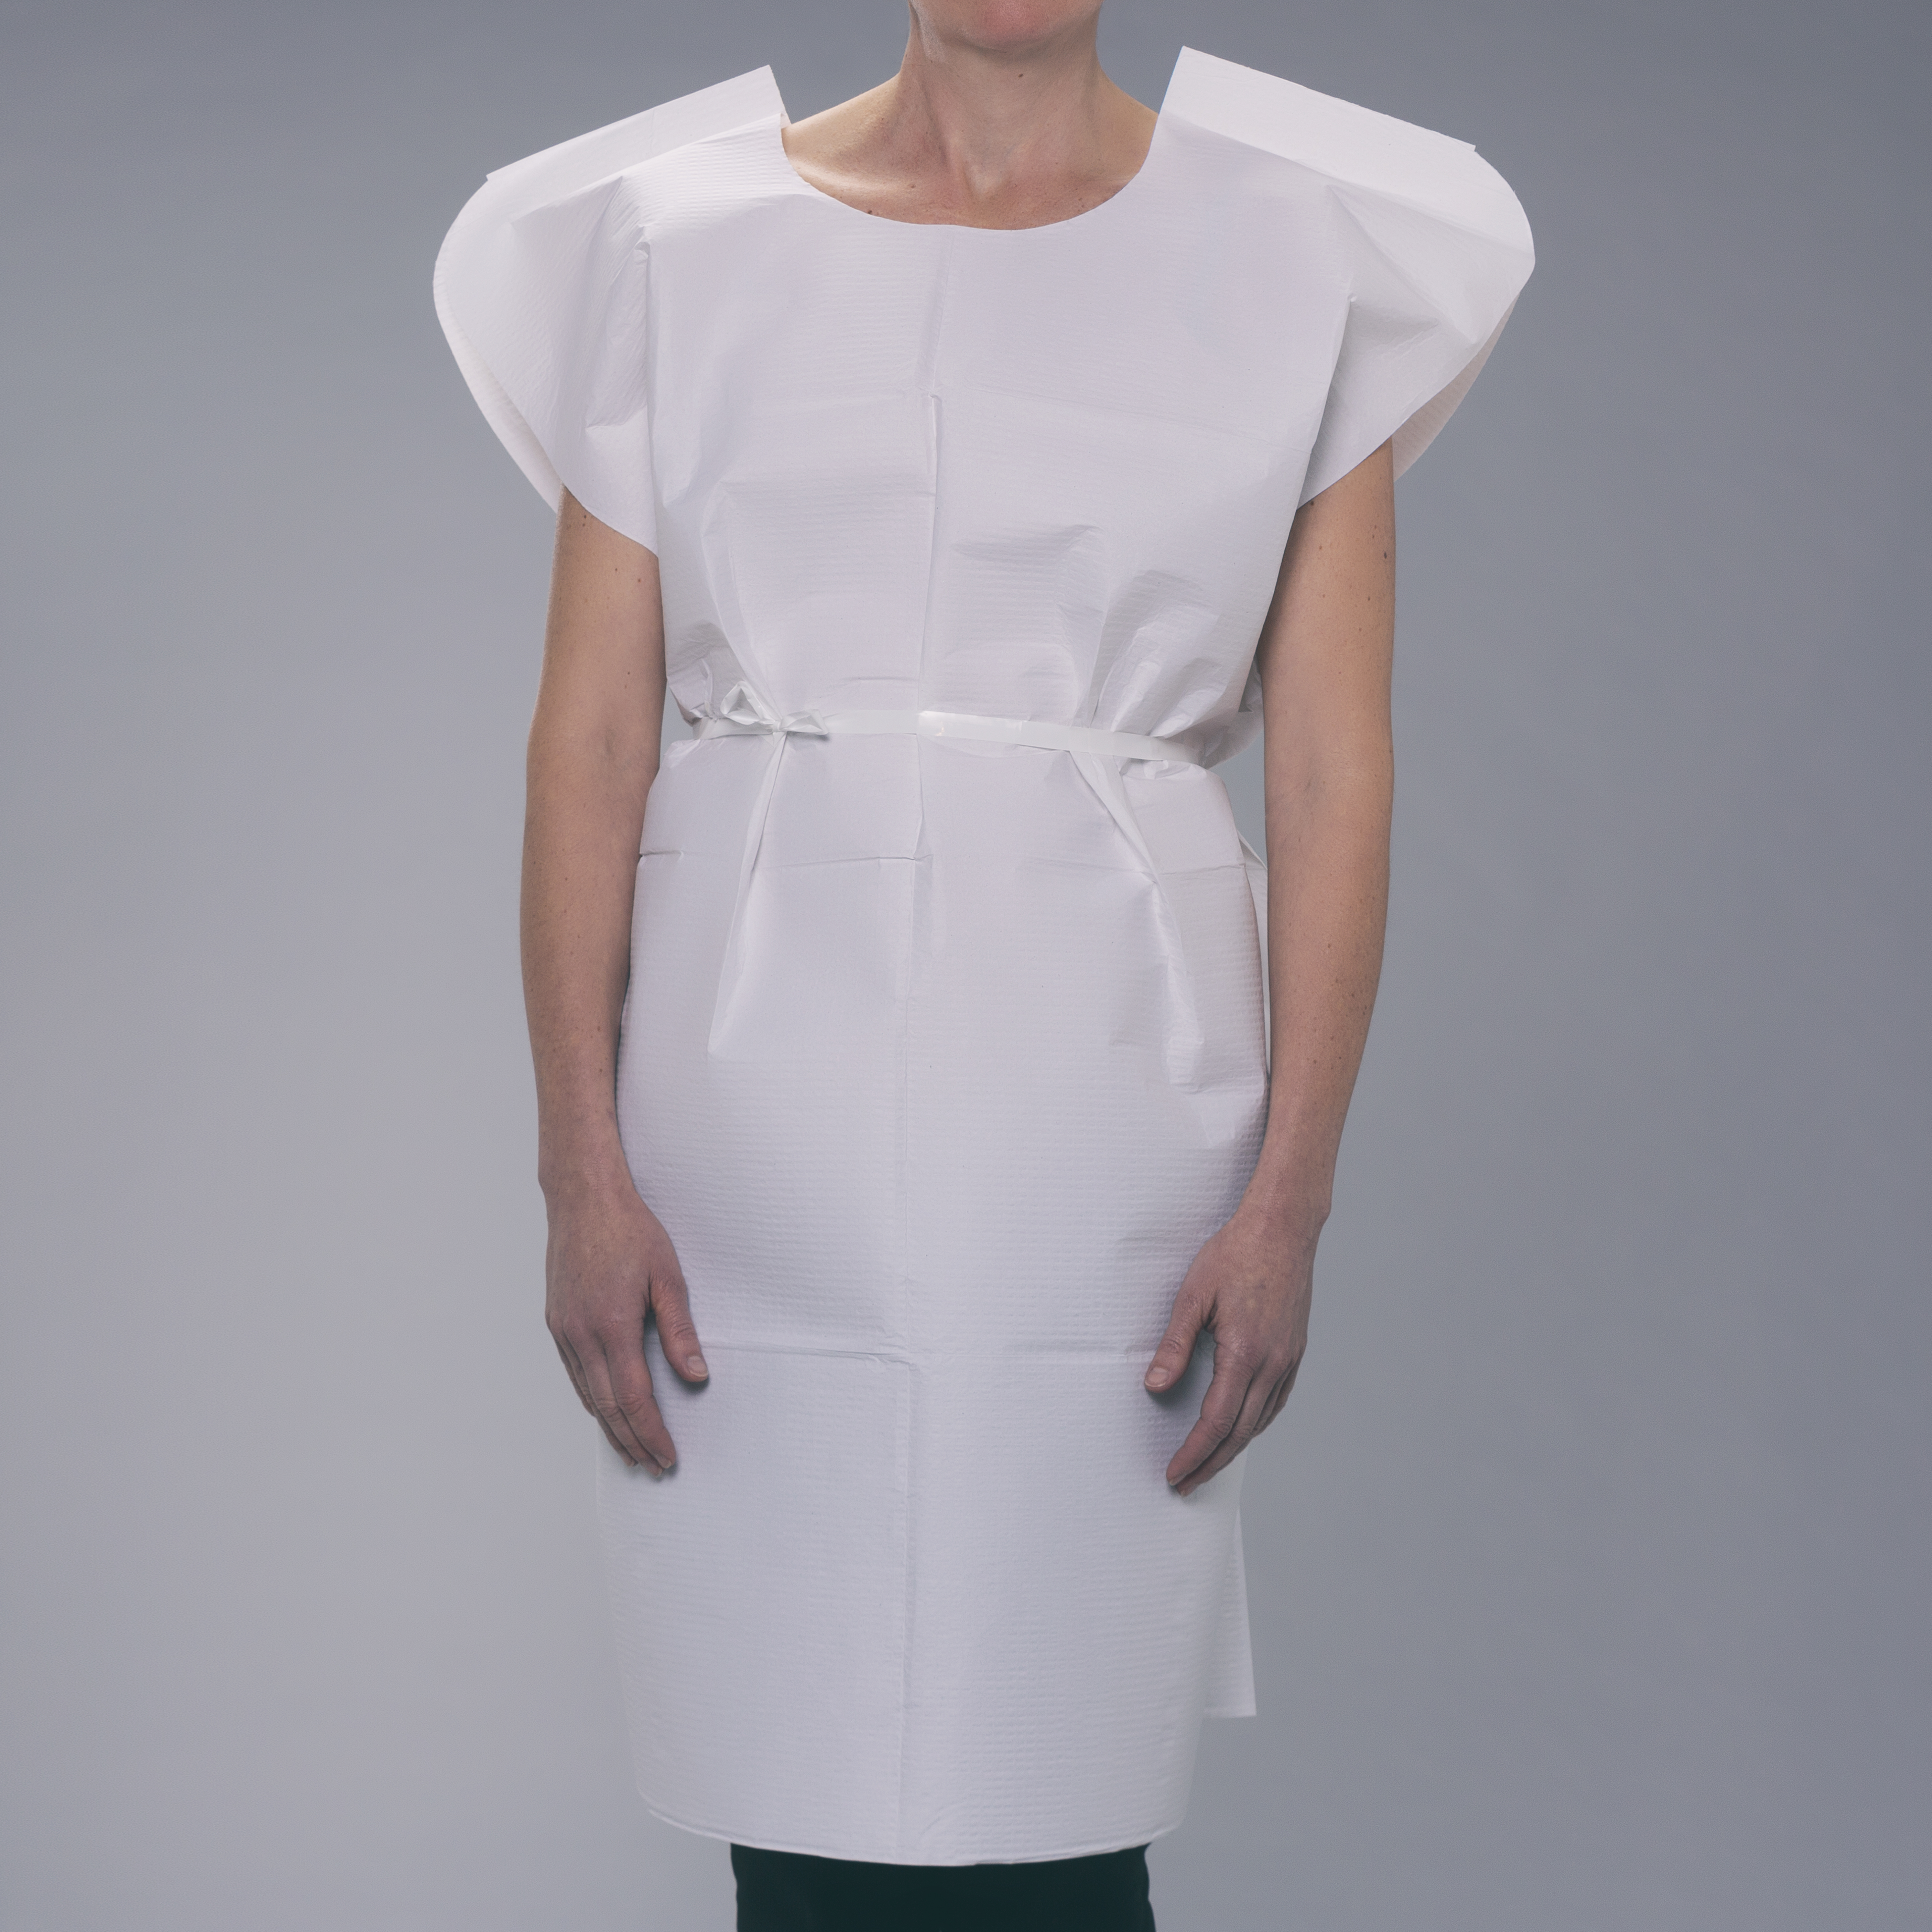 REA COMPANY Patient Gowns Combo5 Disposable Isolation Gowns  10 Shoe  Covers  5 Bouffant Caps Medical Gowns American CompanyMammogram GownLab  GownsHospital Gowns for Women and MenPPE  Amazonin Industrial   Scientific